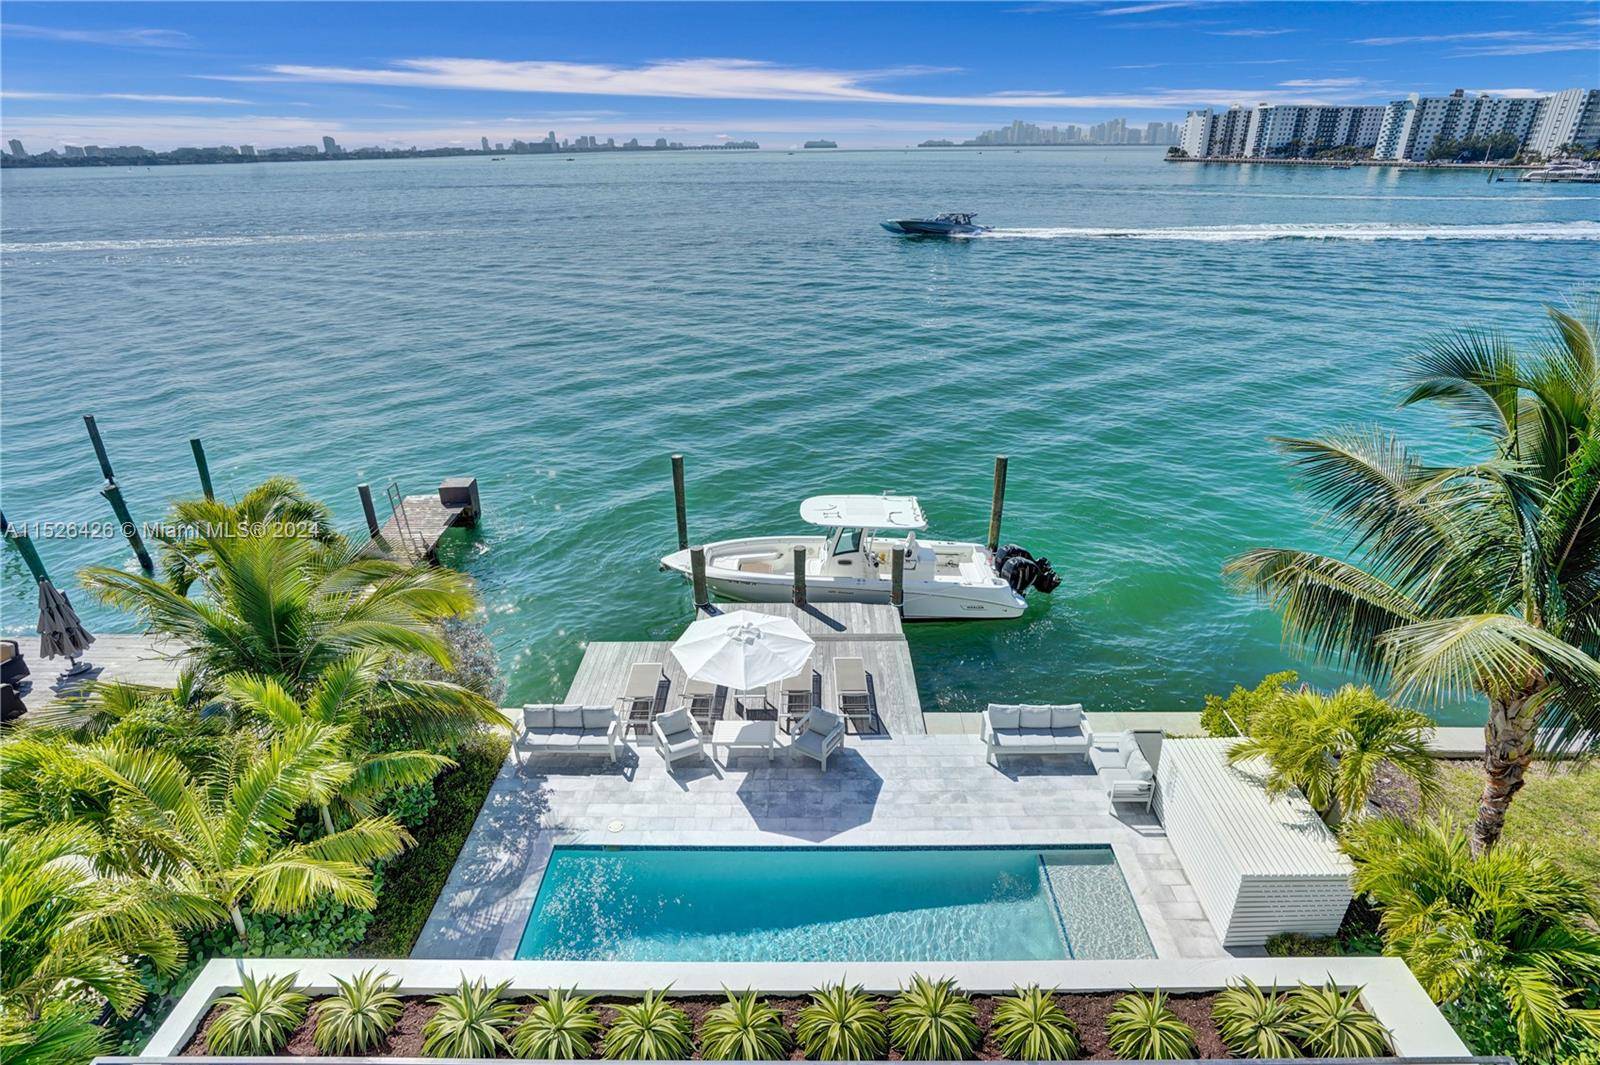 Spectacular panoramic Bay views from this stunning full floor waterfront residence with enormous 1, 200 sqft.